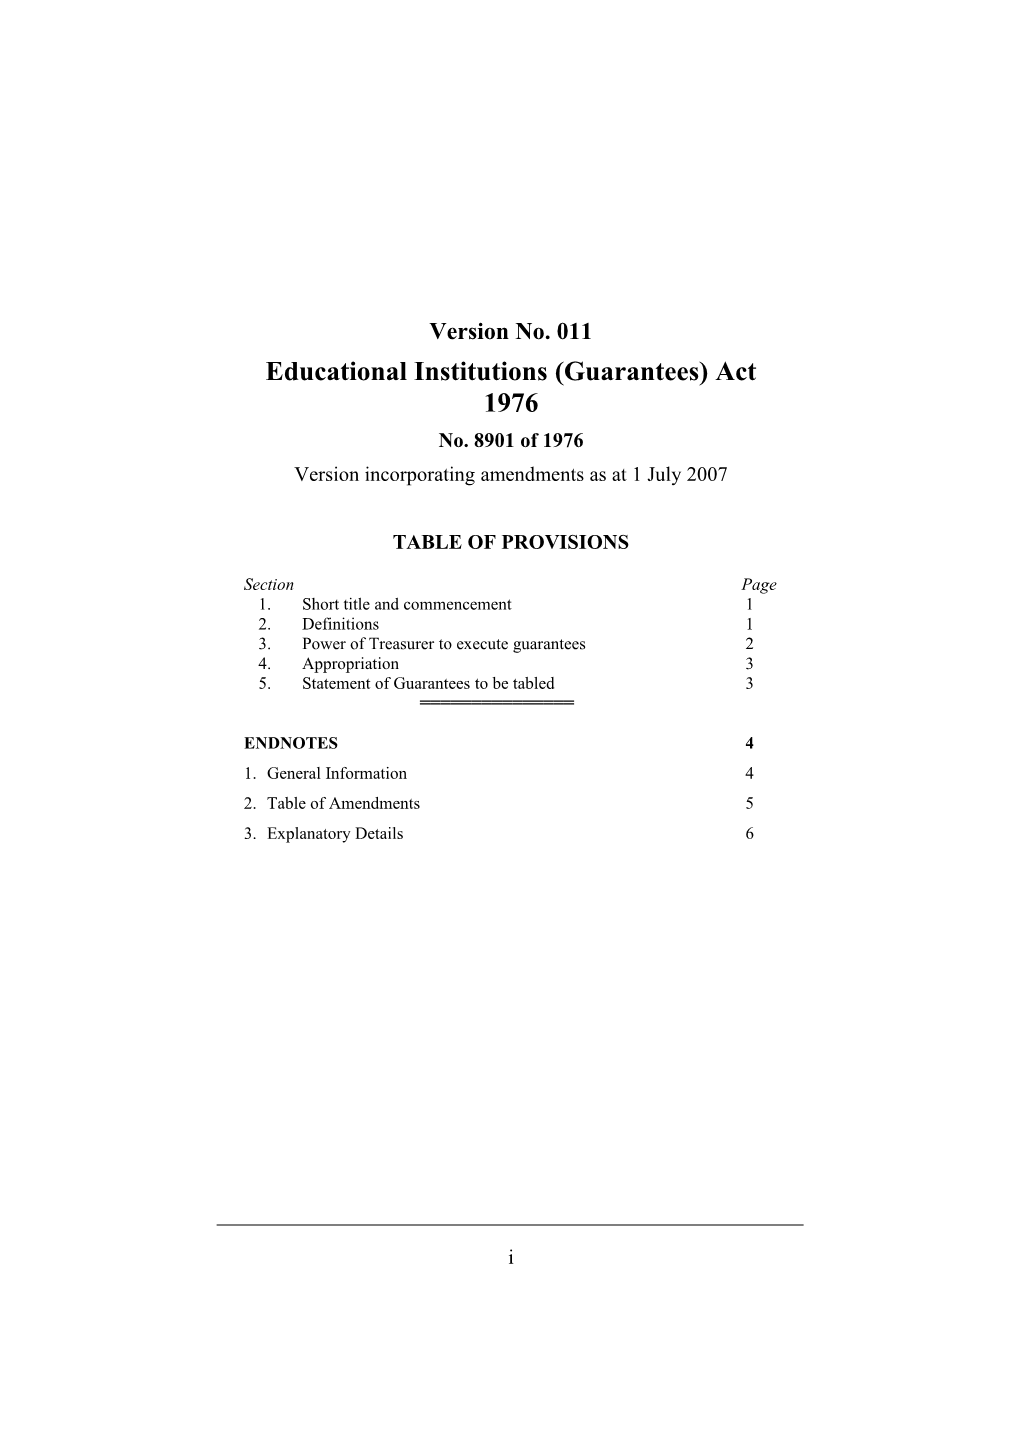 Educational Institutions (Guarantees) Act 1976